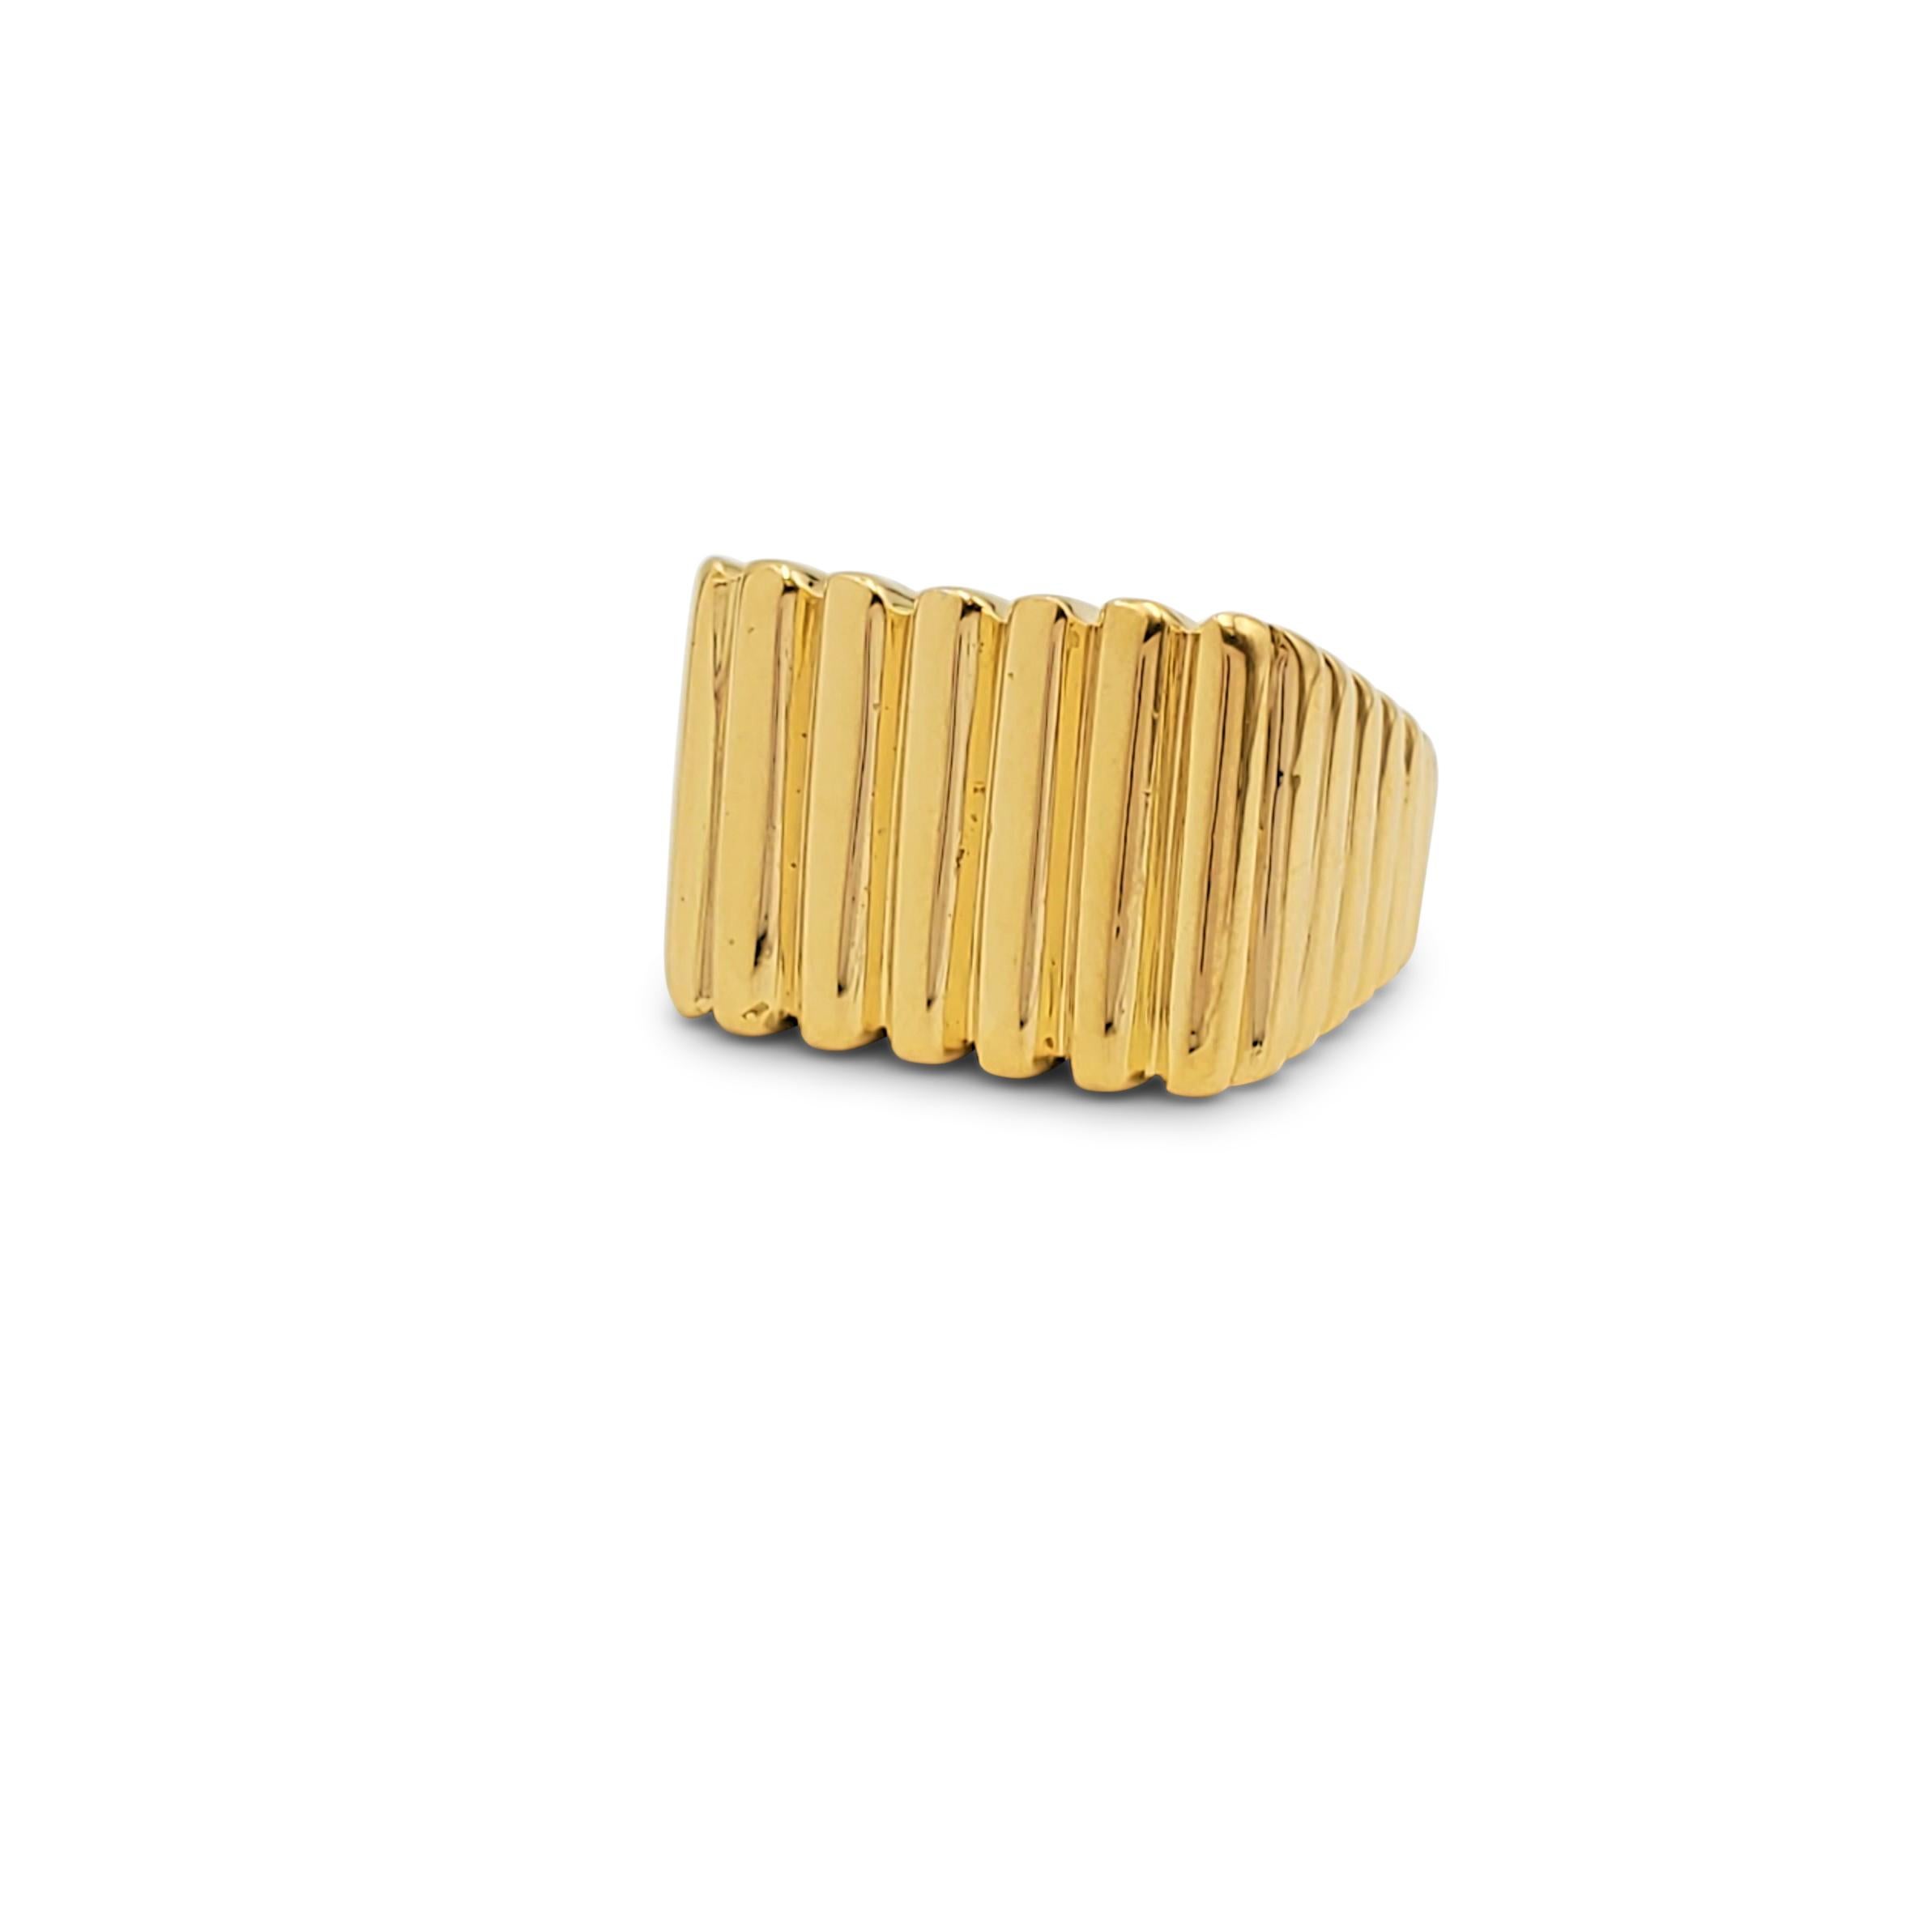 A funky vintage geometric ring crafted in ribbed 18 karat yellow gold. Stamped 18K, T&H. Ring size US 3 1/2. The ring is not presented with the original box or papers. CIRCA 1970s.

Ring Size: US 3 1/2
Box: No
Papers: No